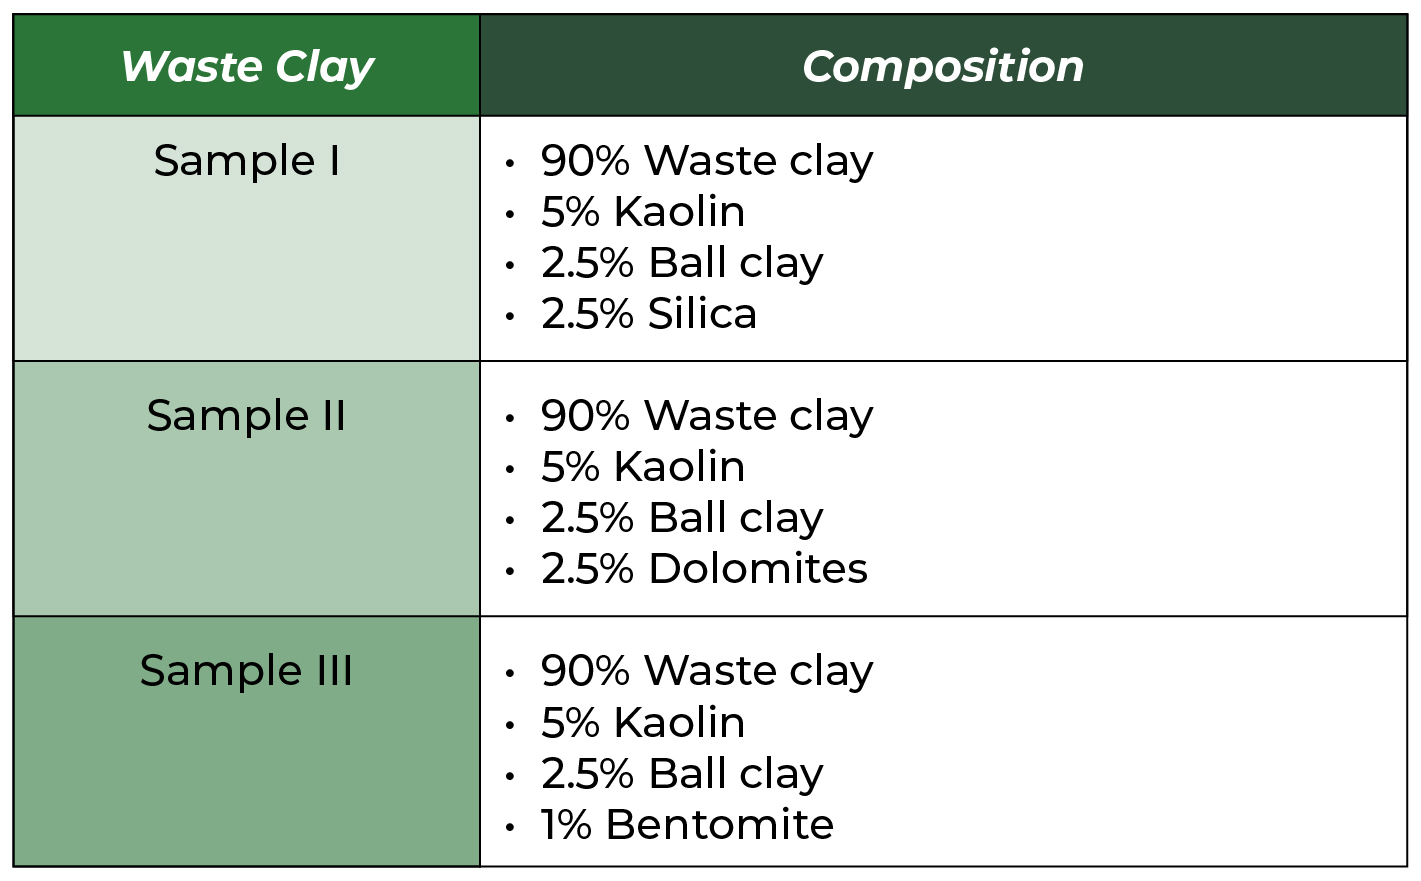 Table 2. The mixture of materials to be used for waste clay treatment